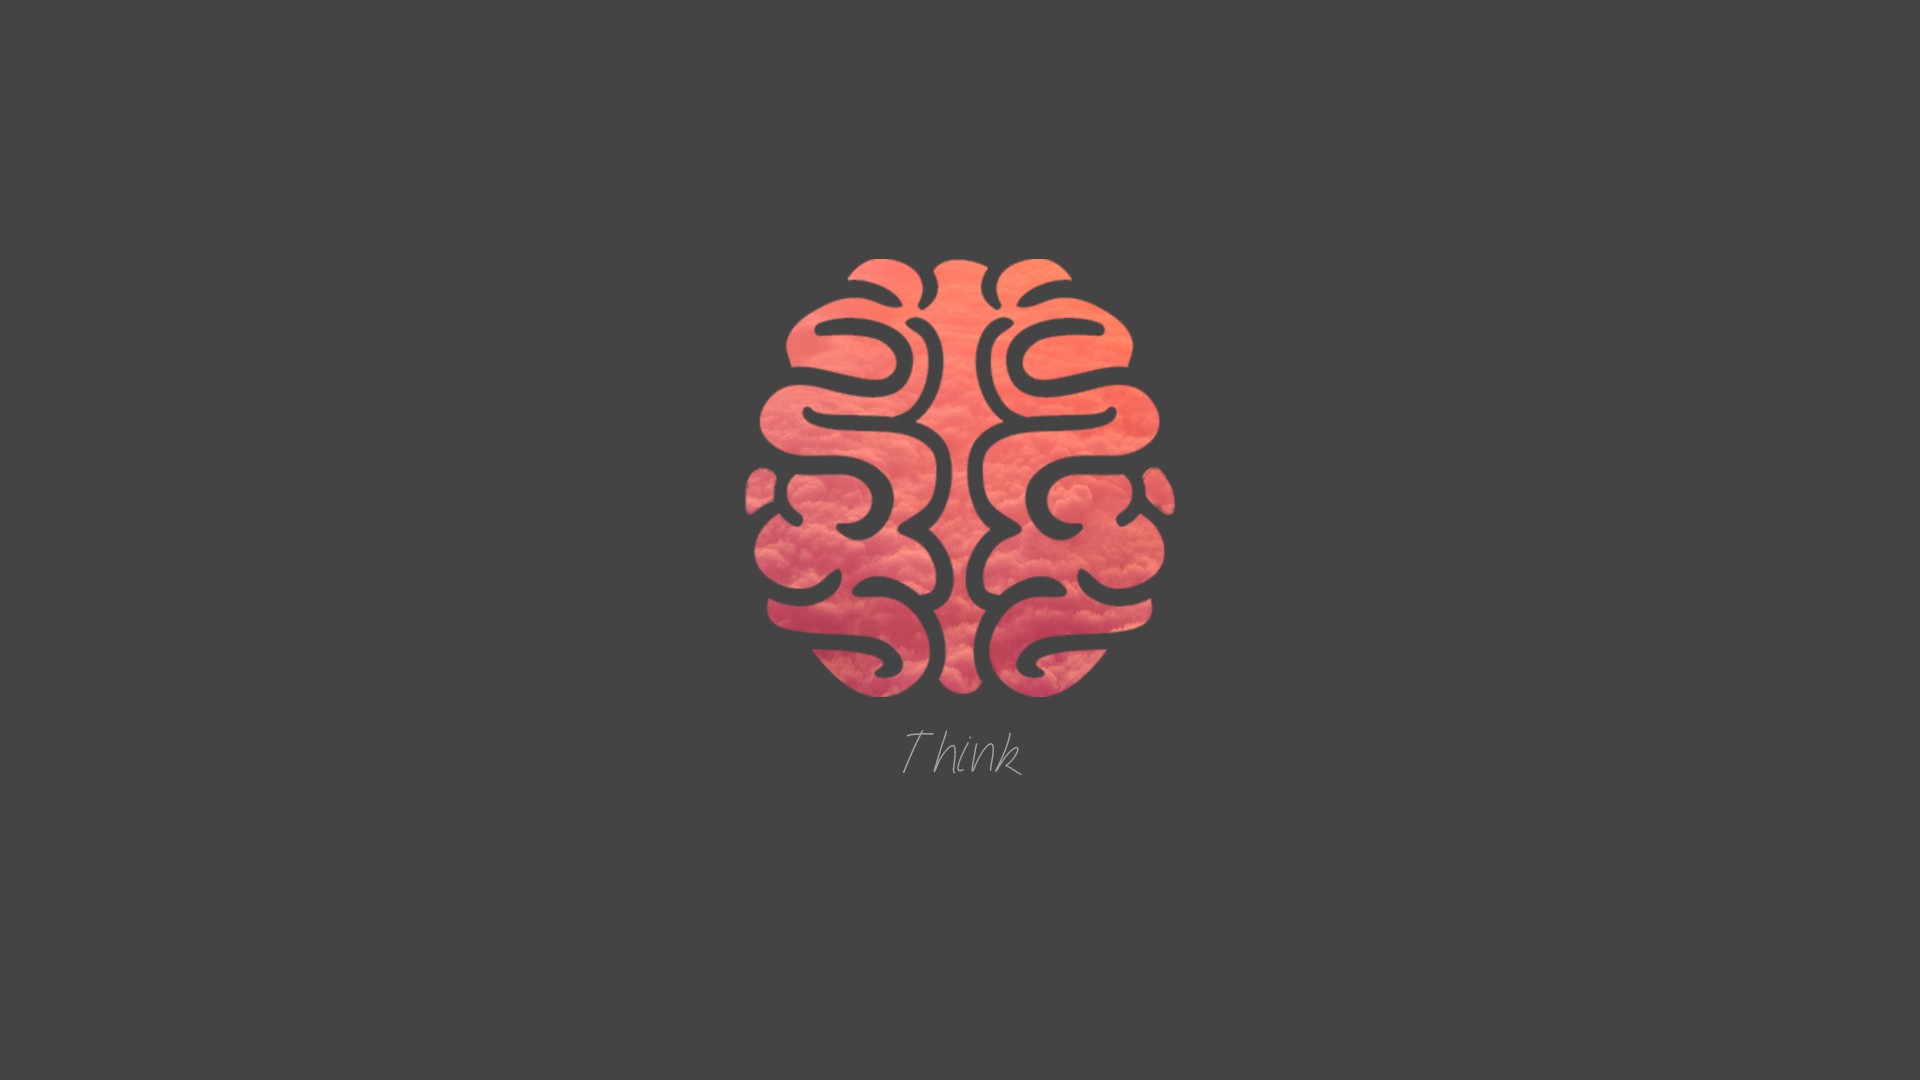 General 1920x1080 brain minimalism simple background red gray background text gradient